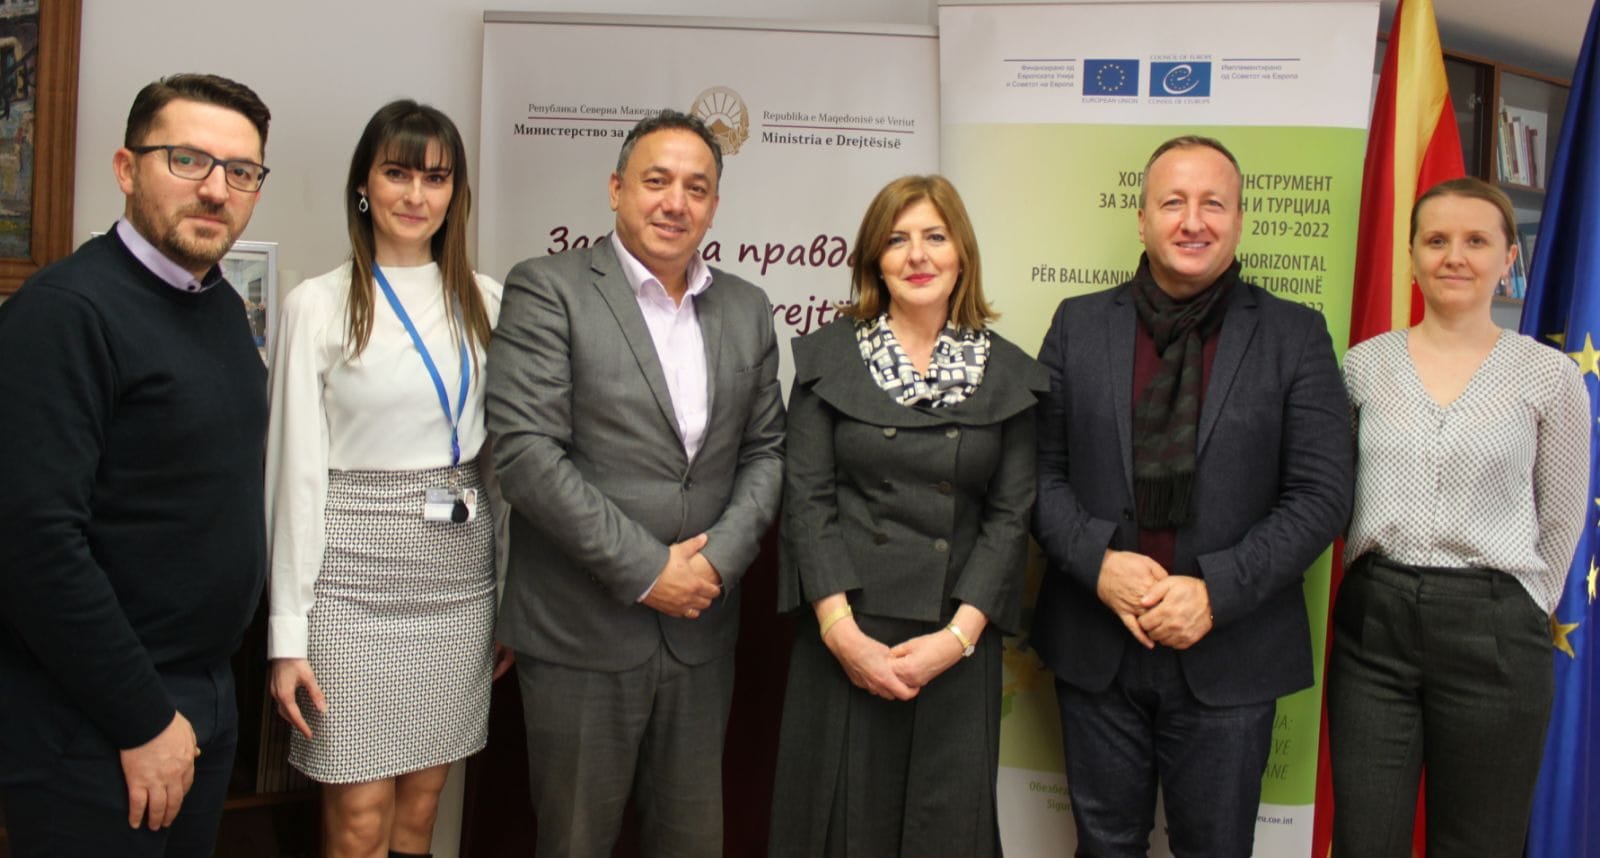 Supporting Ministry of Justice and its Regional Offices with technical equipment for an effective implementation of the free legal aid in North Macedonia